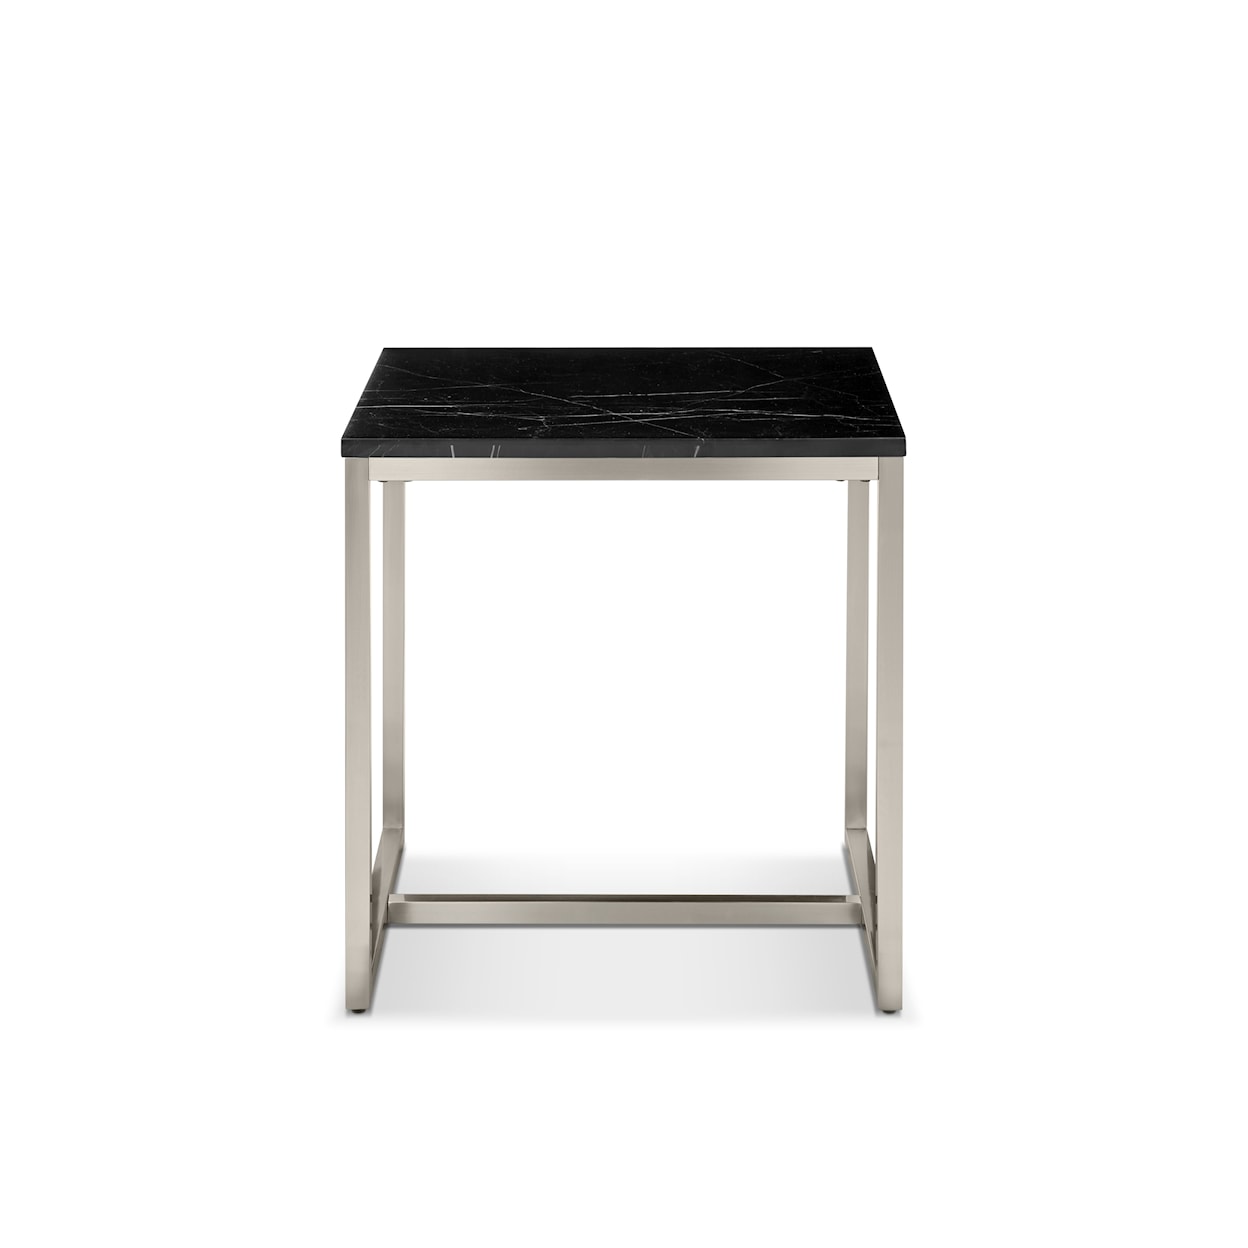 Magnussen Home Kira Occasional Tables Rectangular End Table